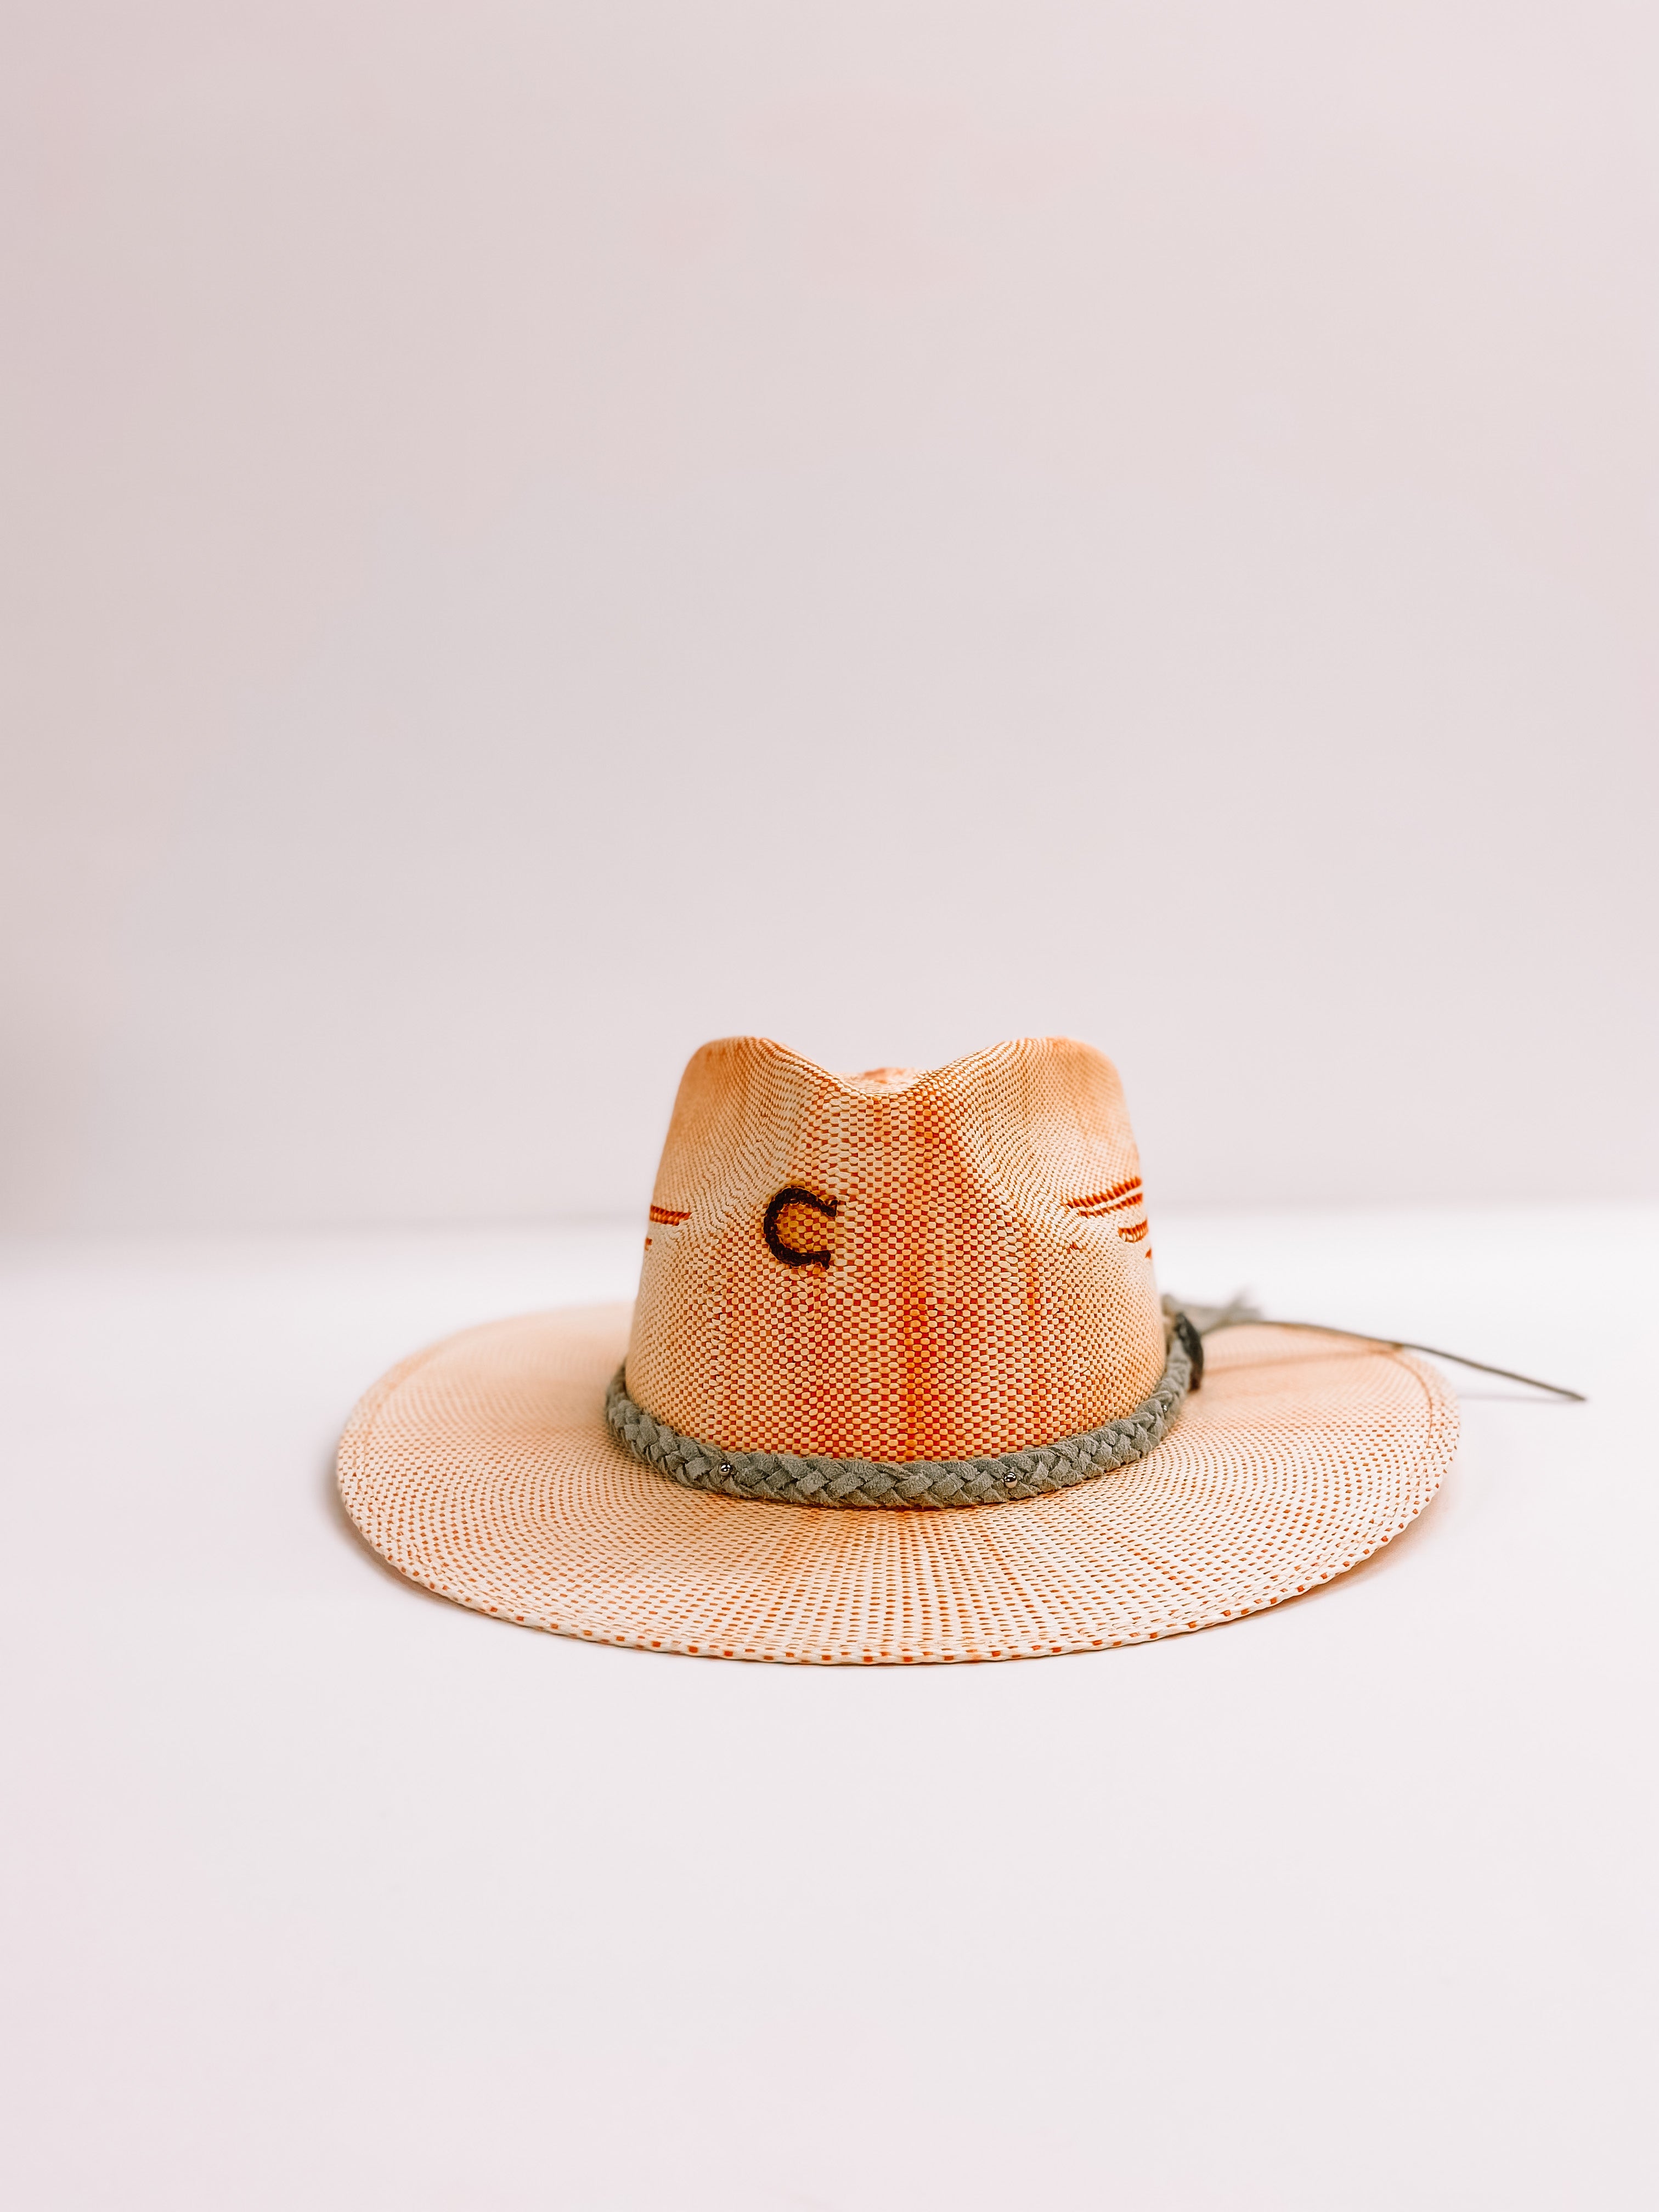 Charlie 1 Horse | Topo Chico Straw Hat with Braided Band and Silver Concho in Natural Coral - Giddy Up Glamour Boutique